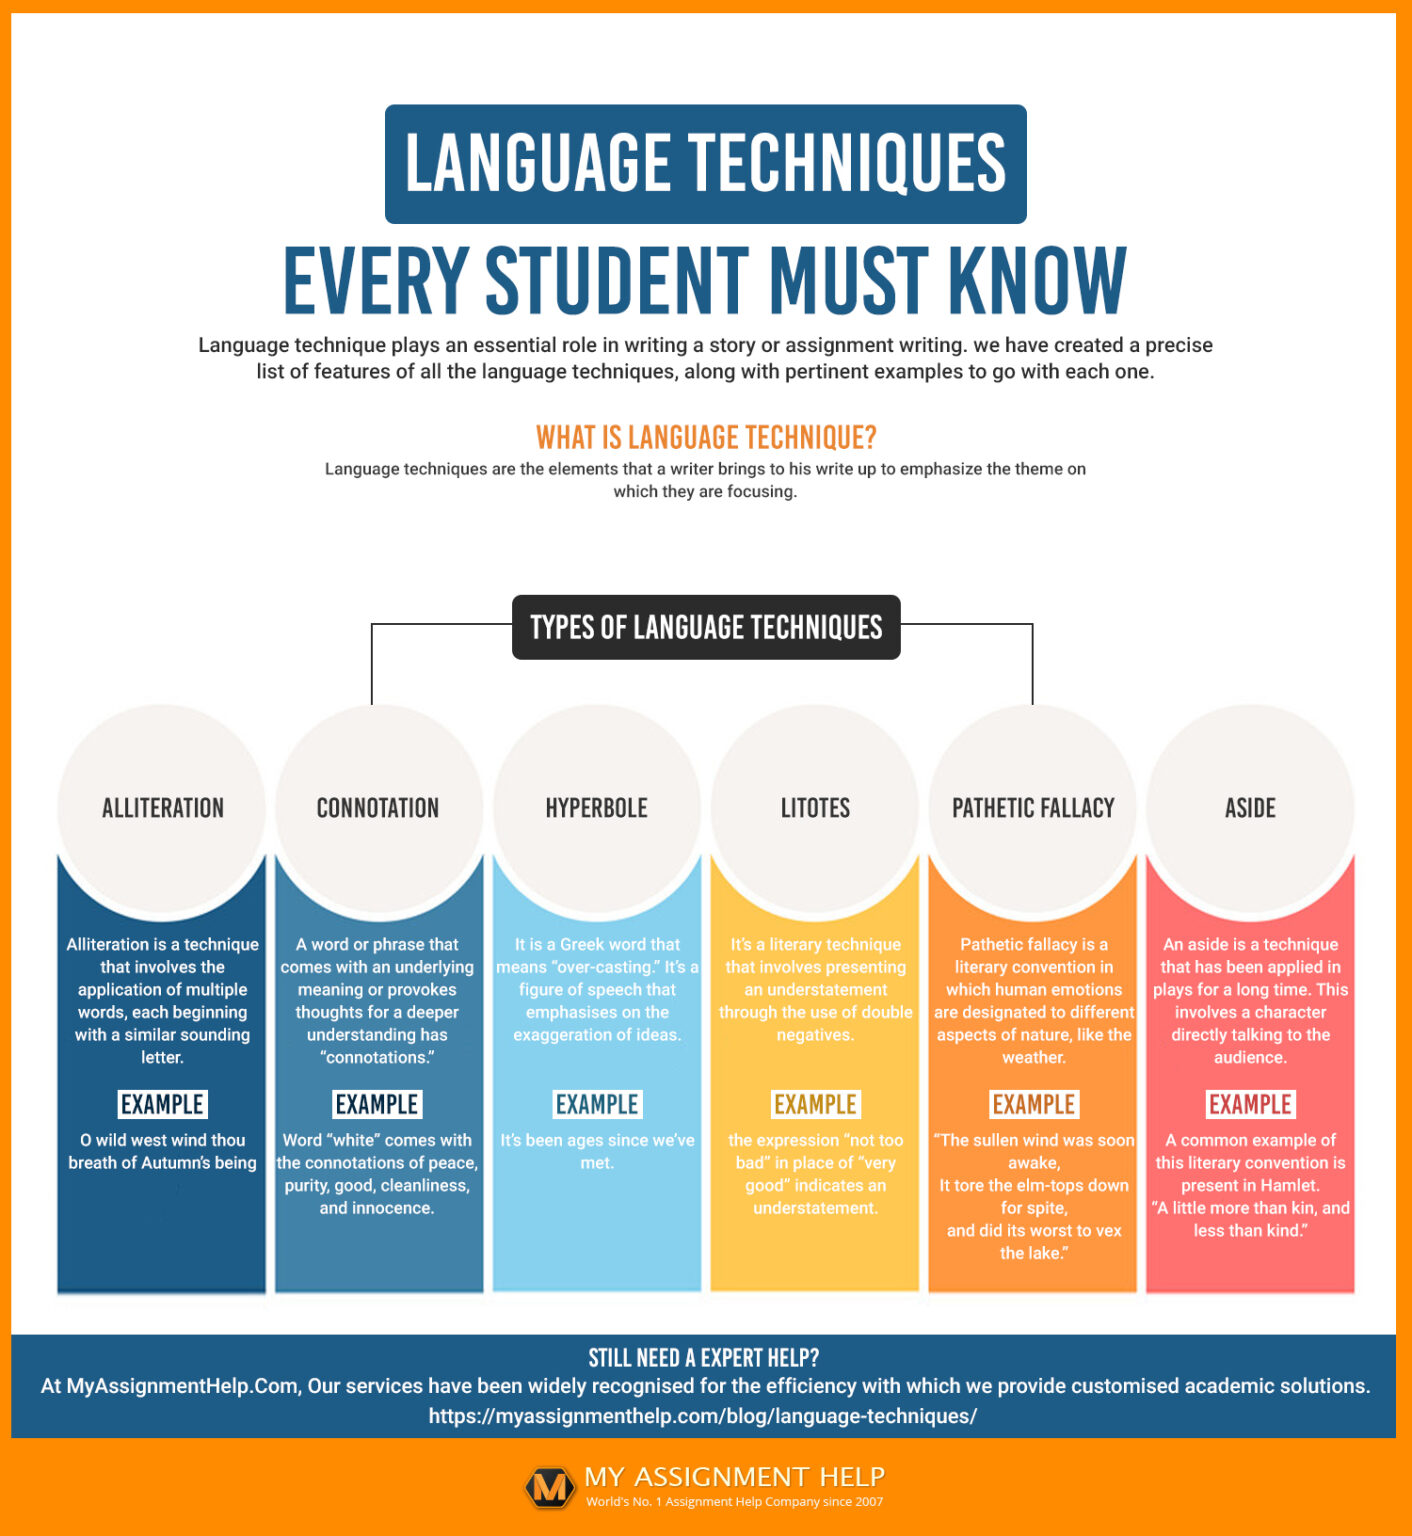 six-most-popular-language-techniques-students-must-know